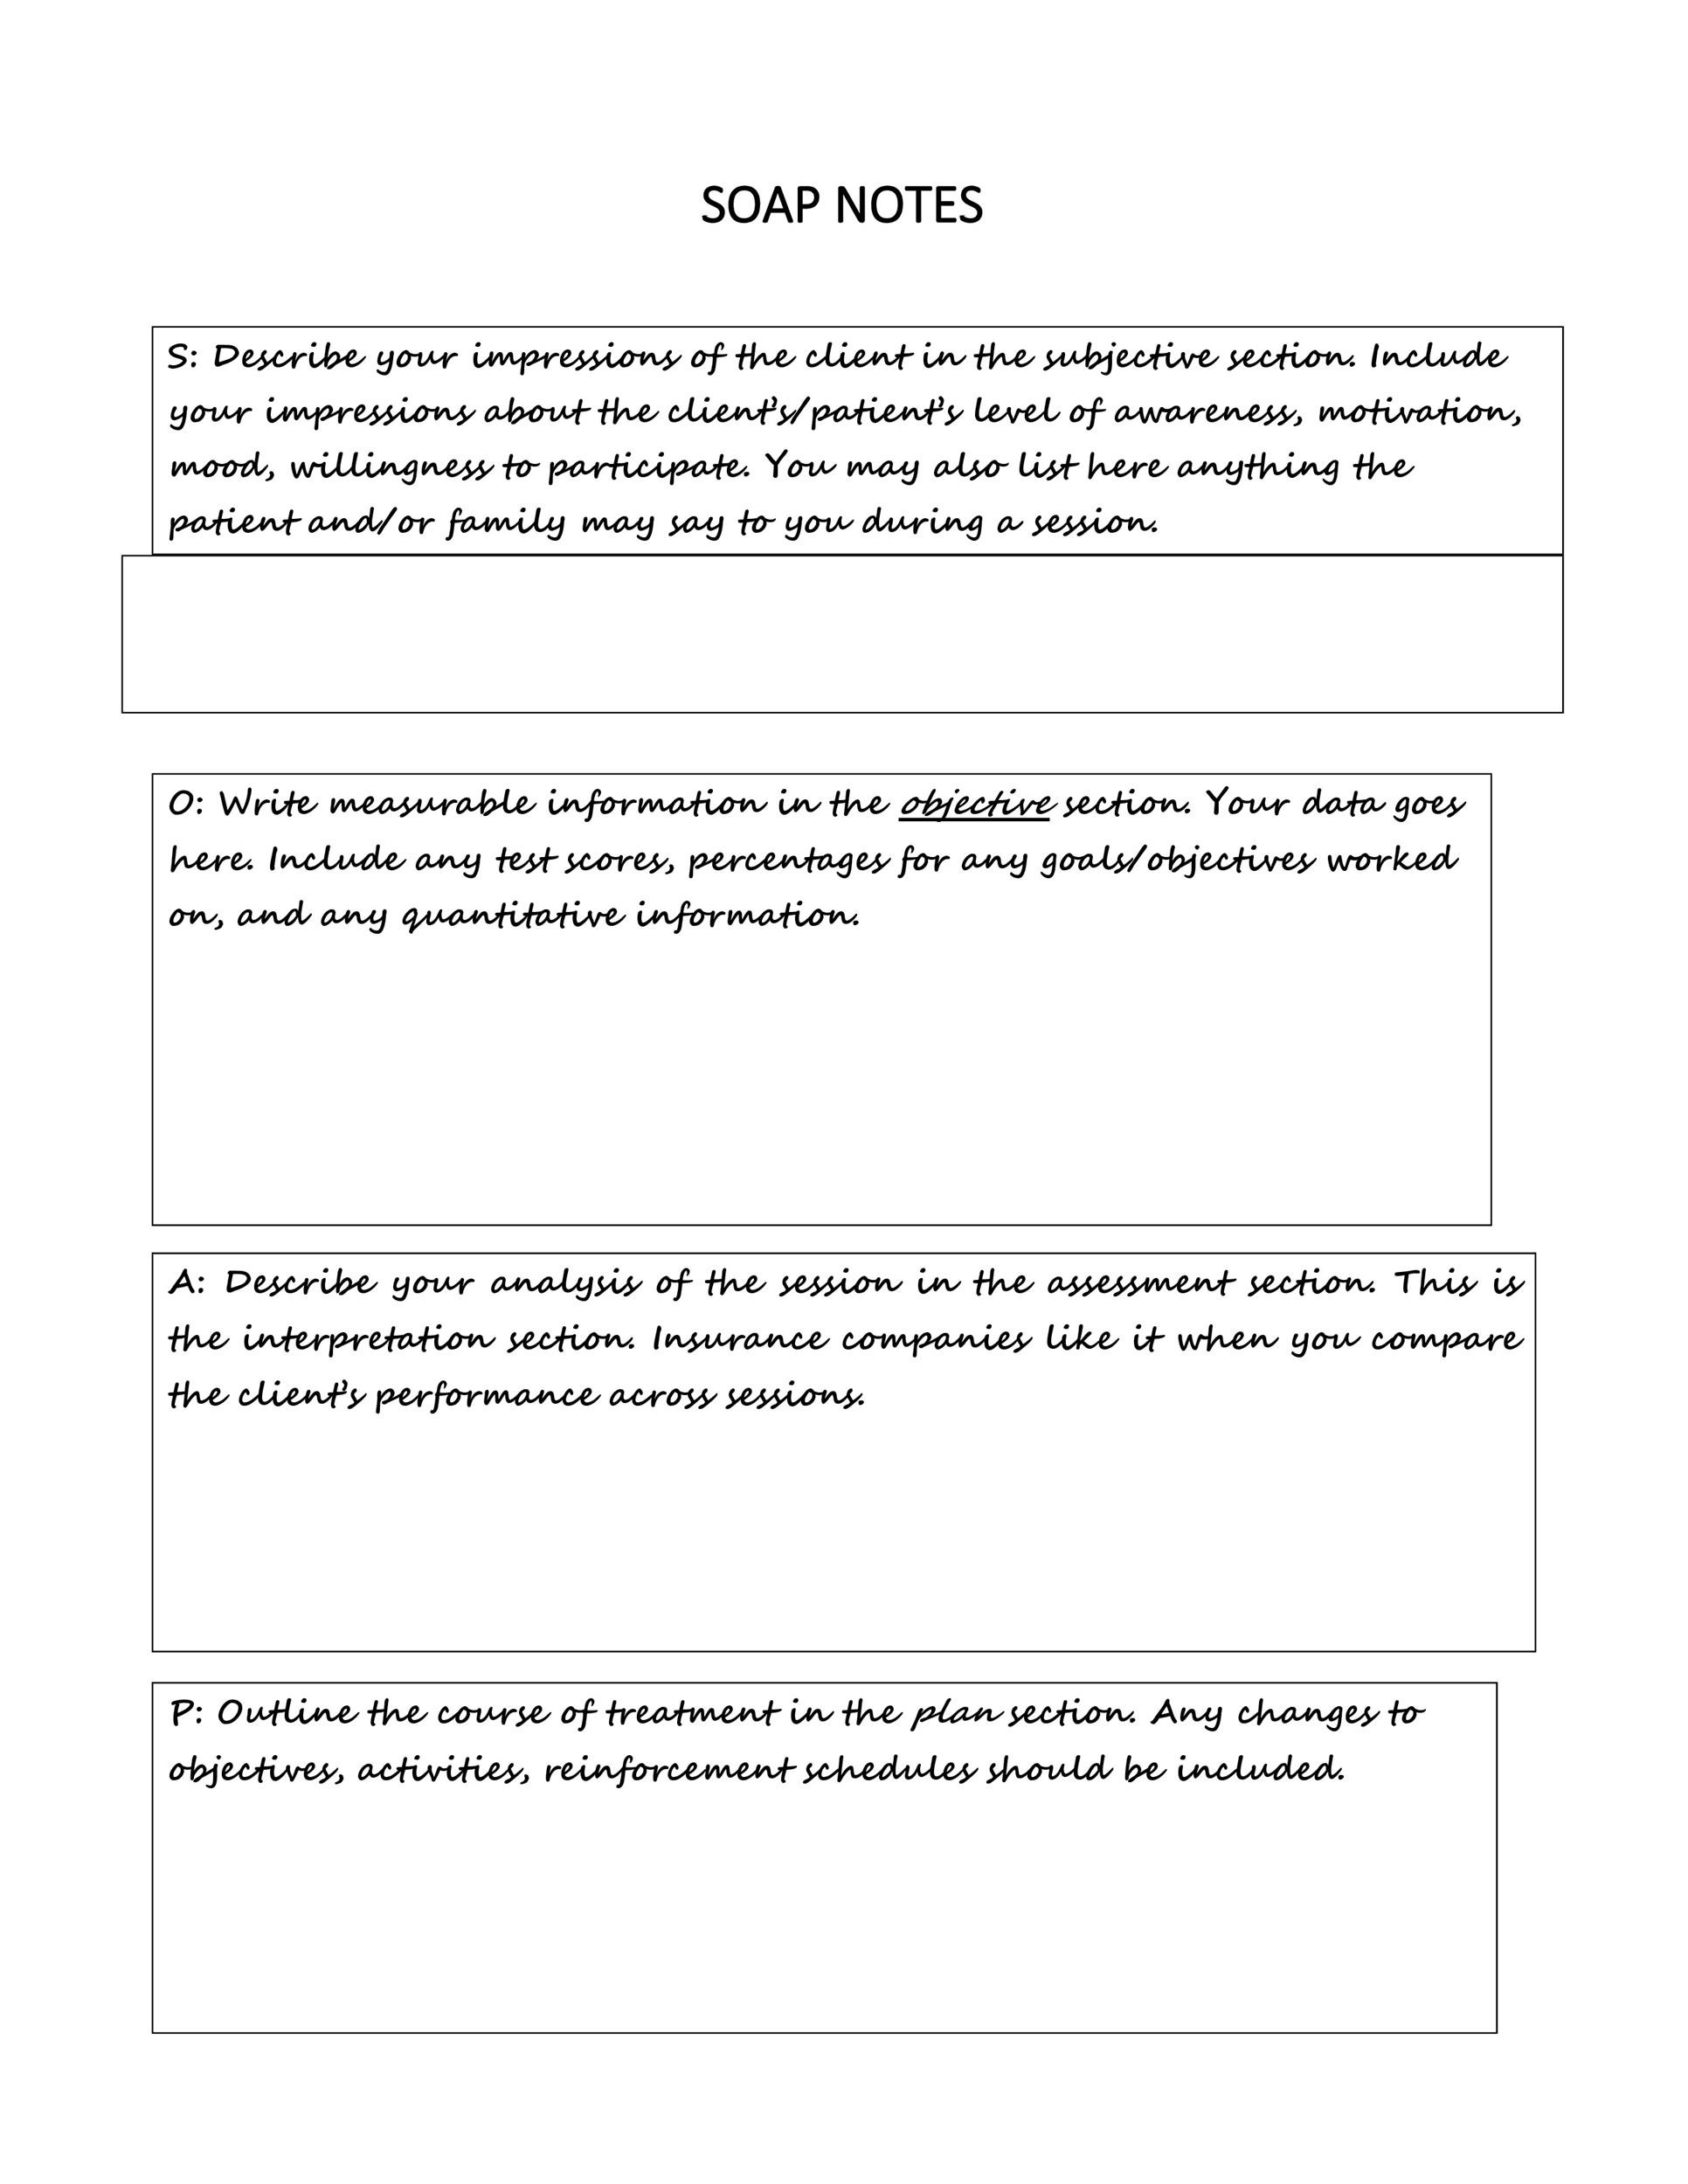 Free Soap Note Template 10